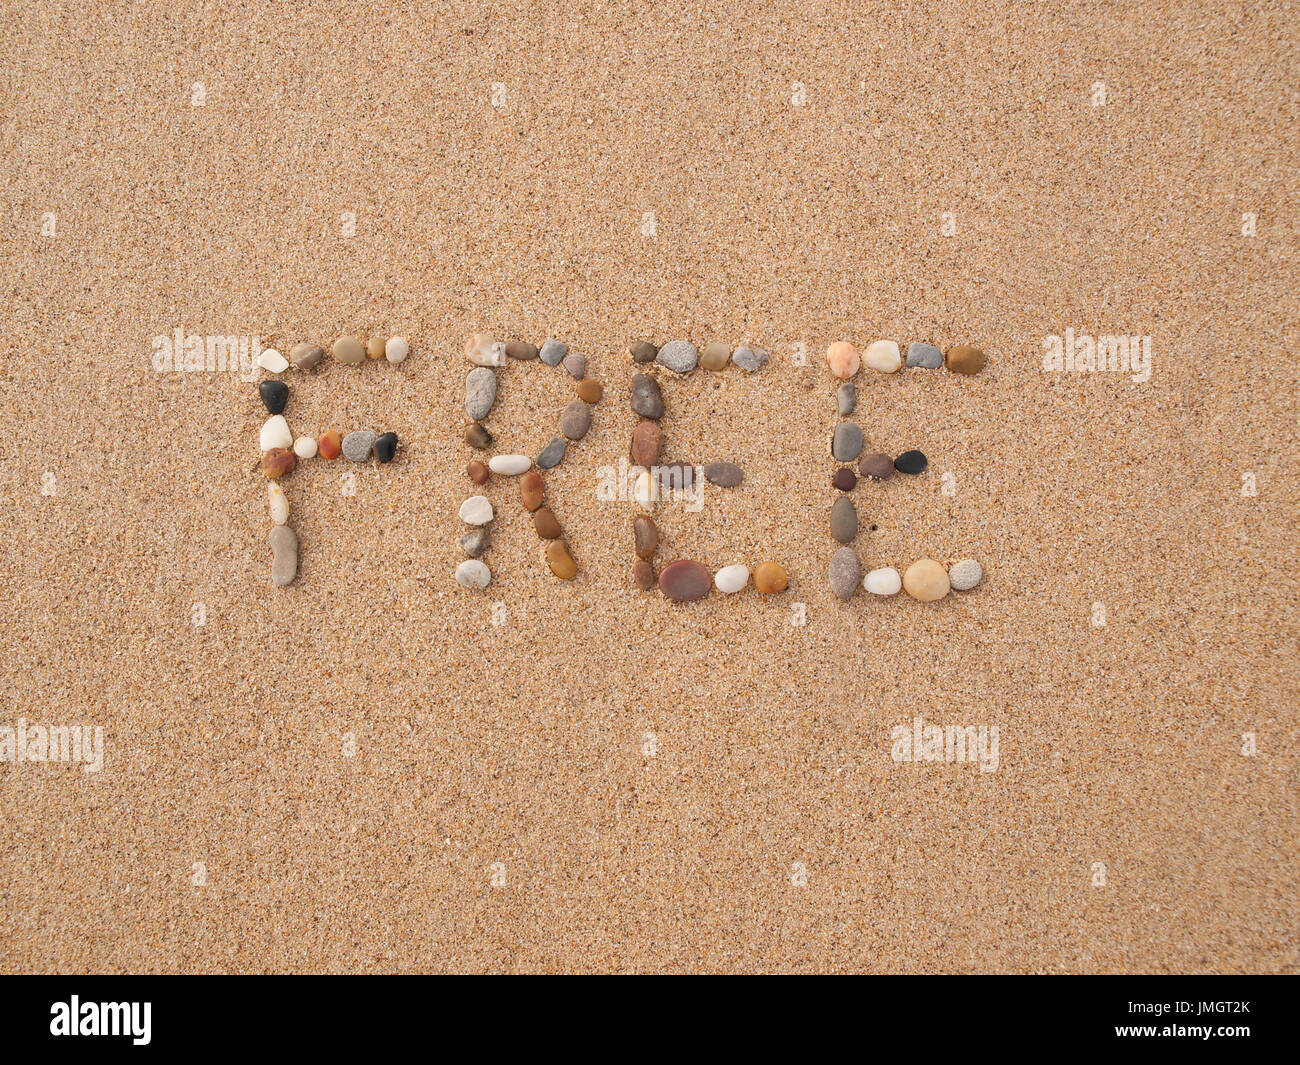 word free written with stones and shells on the beach by the ocean Stock Photo